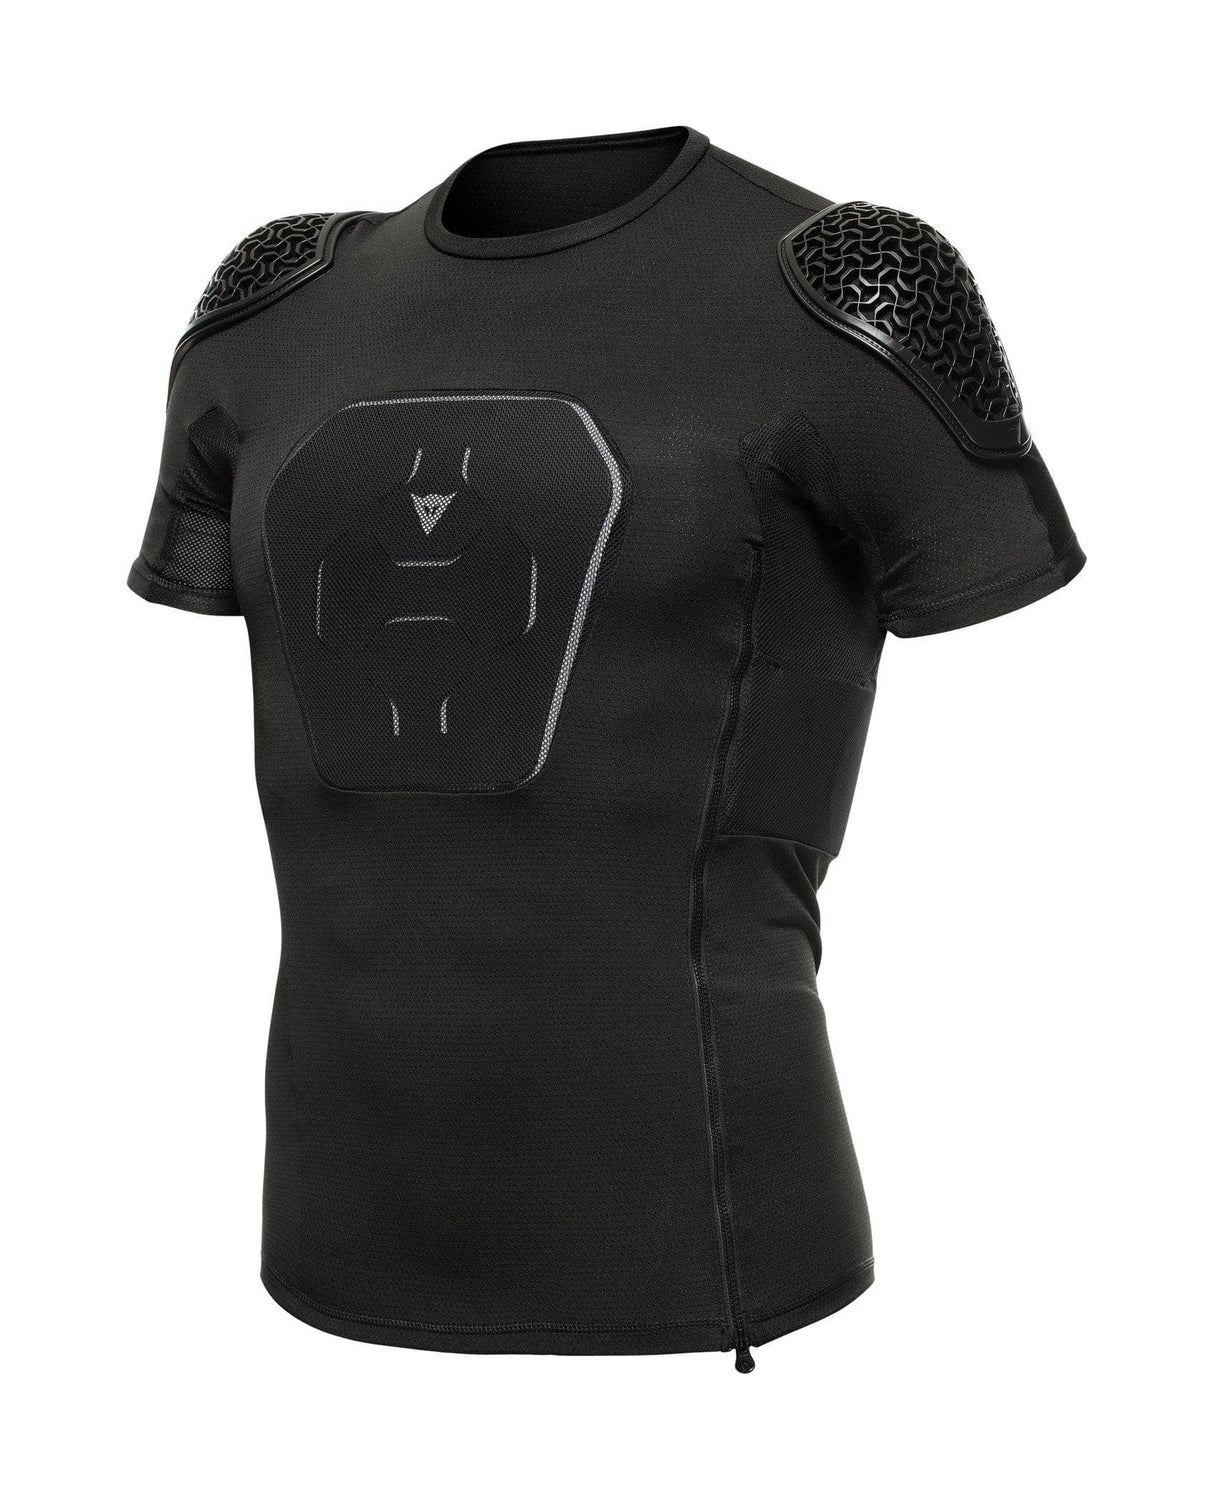 Dainese Rival Pro Armor Tee (Black, M)